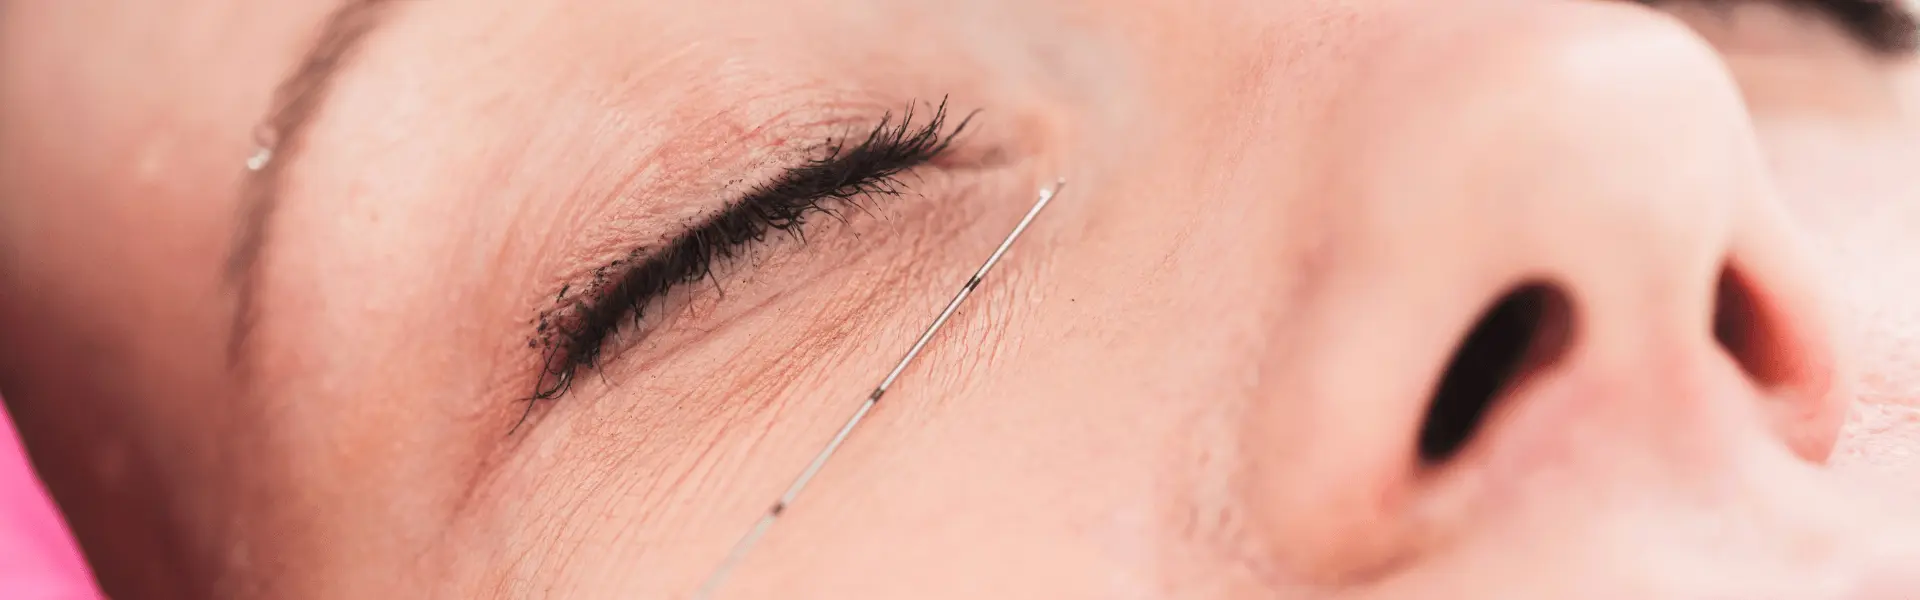 A close up of a woman's eye with a needle.